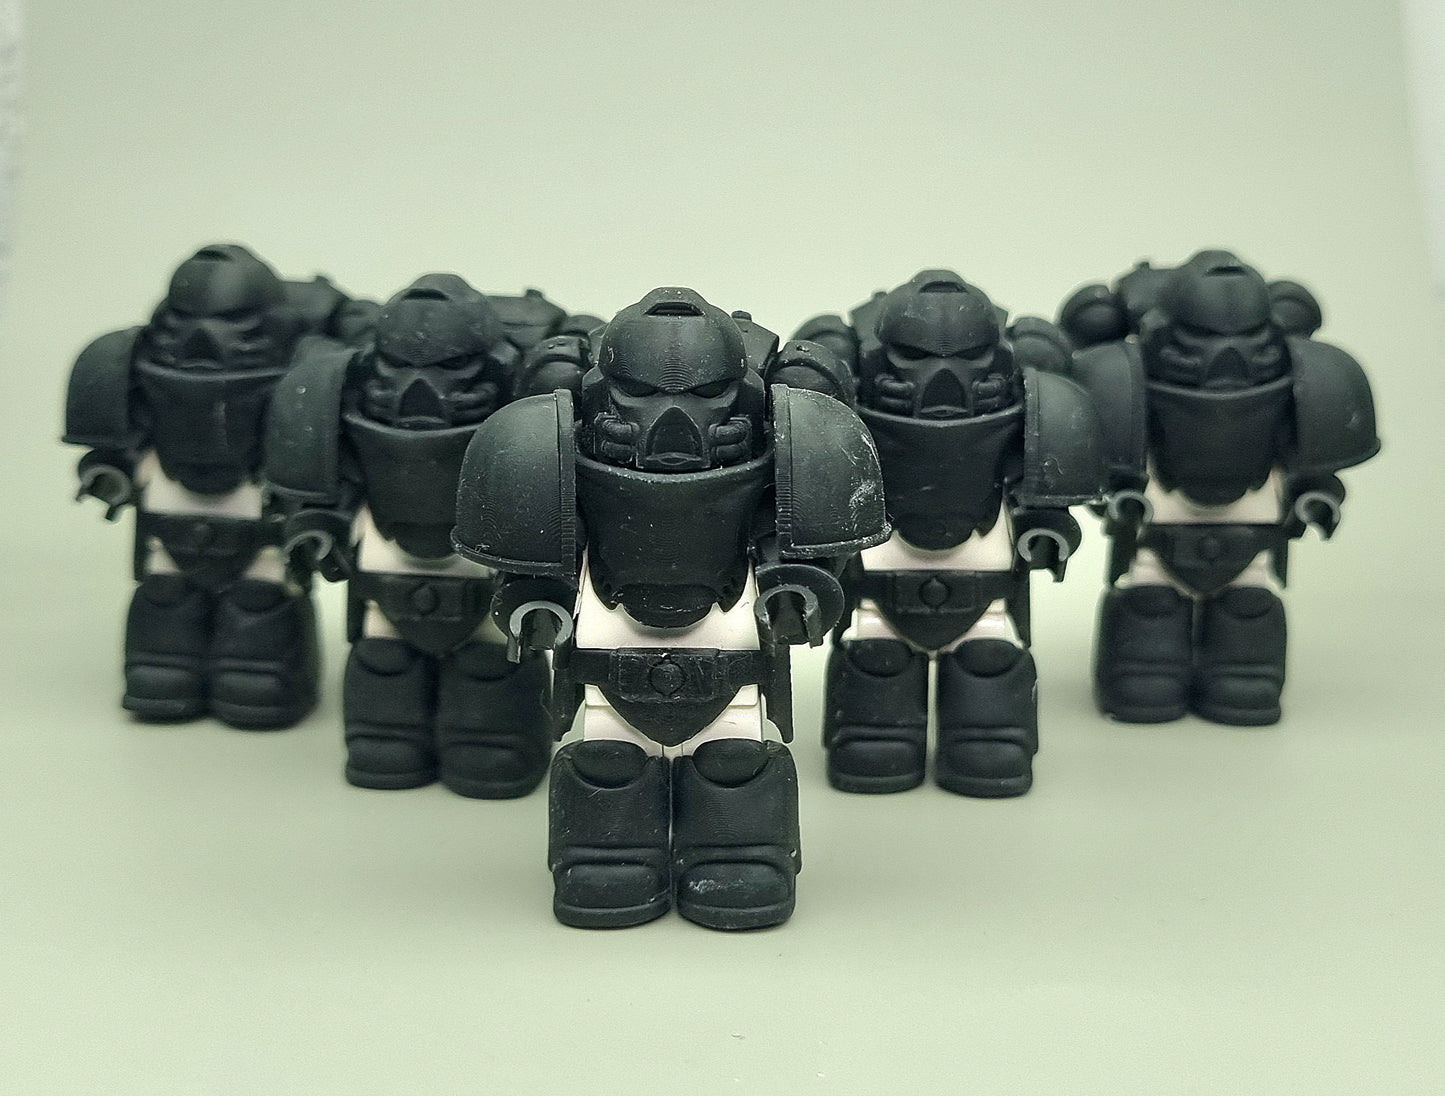 Building toy custom 3D printed galactic soldiers army builder pack of 5!